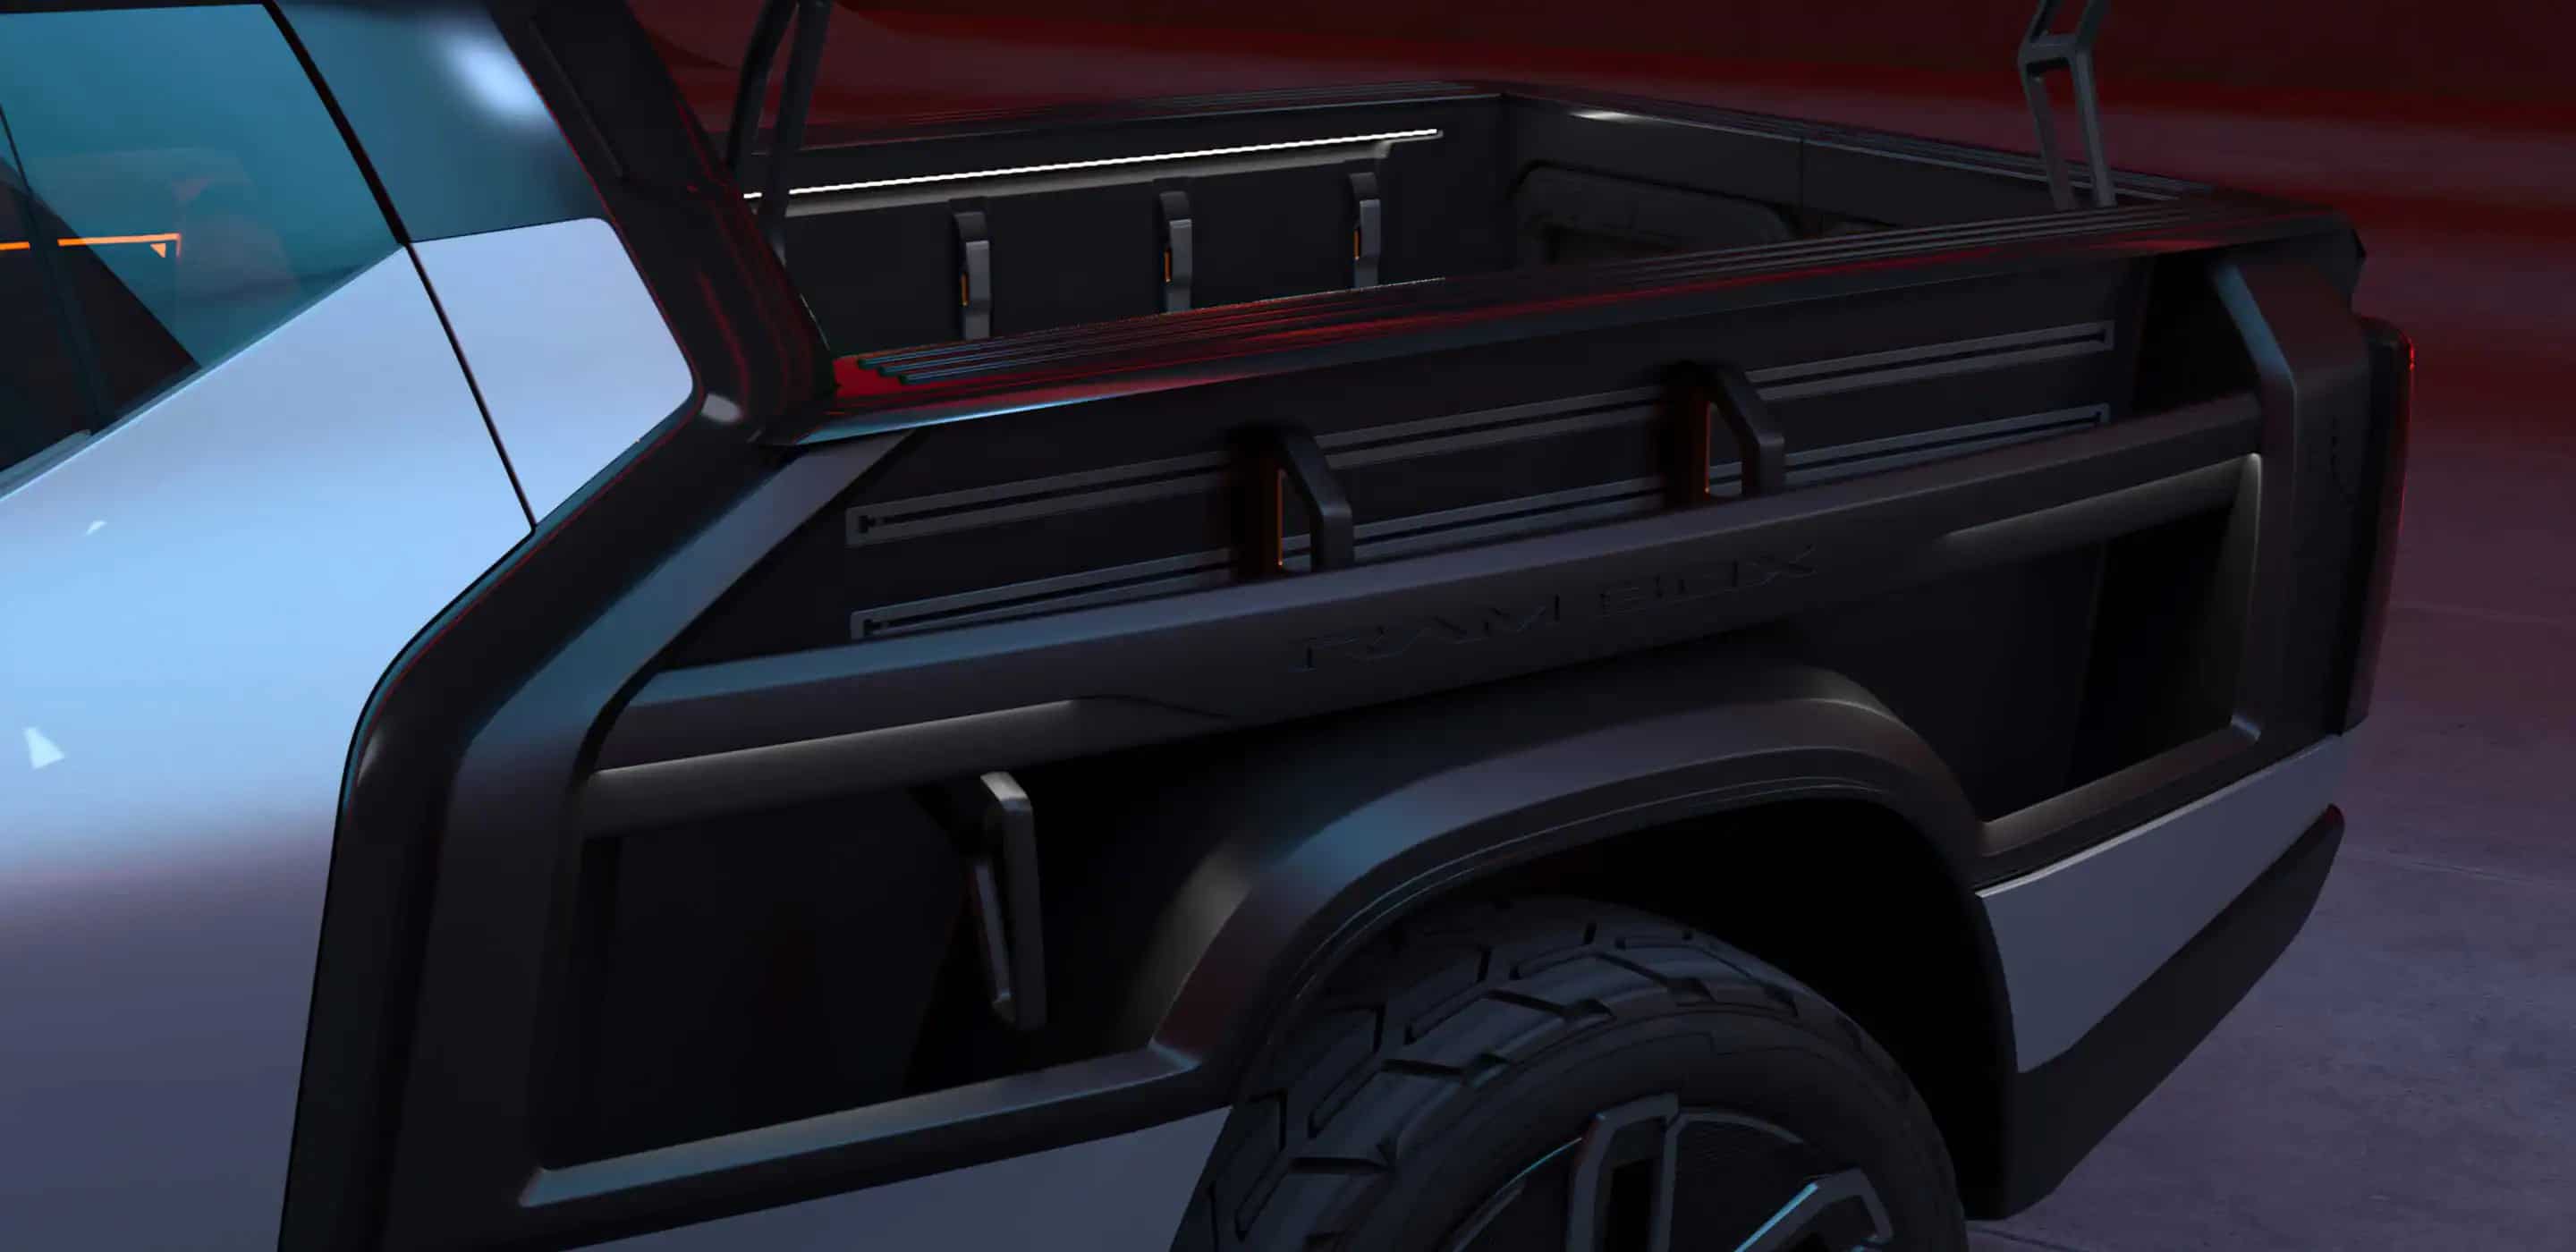 Ram 1500 electric truck concept details released ahead of reveal